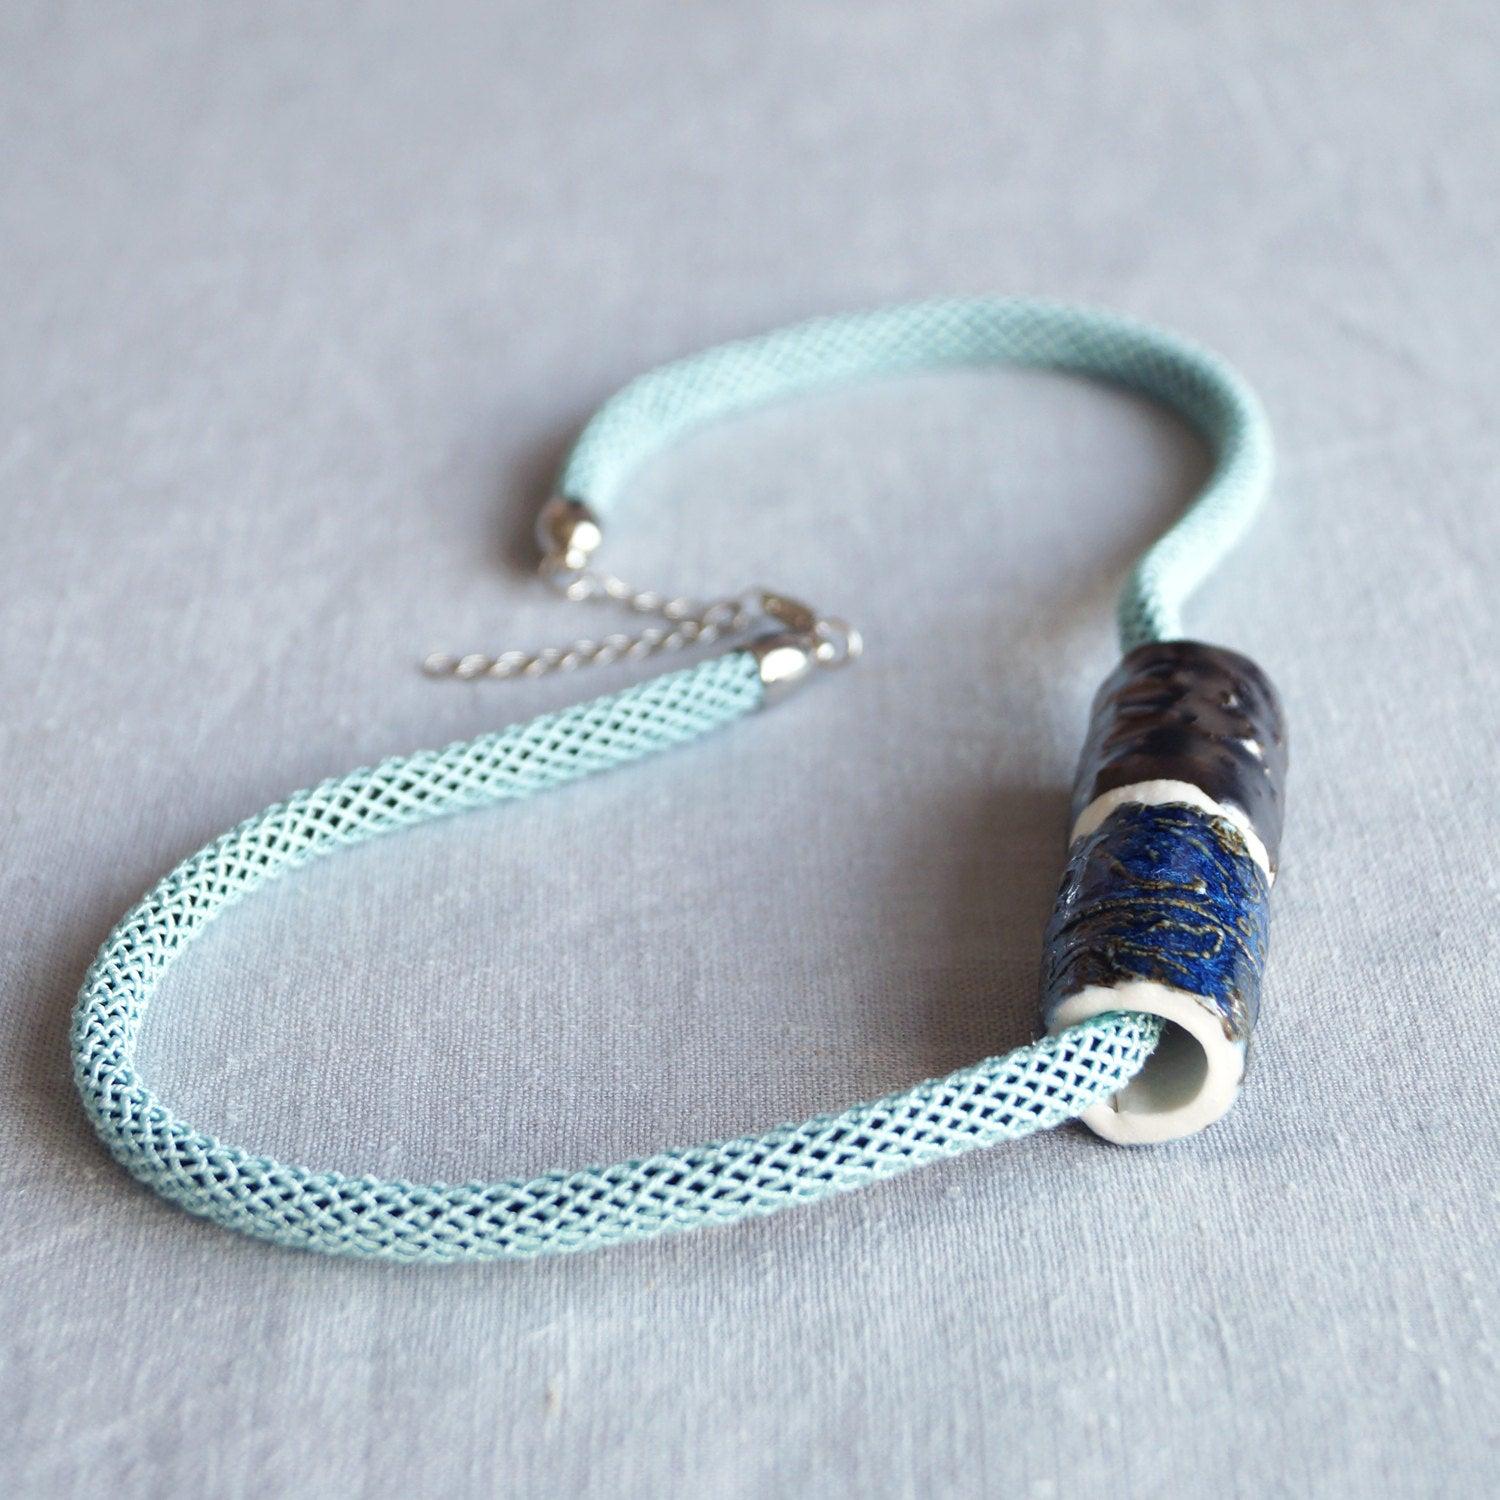 LACE bead necklace, white porcelain, rope necklace, midnight blue, aqua, glaze, silk braided rope, Vanillakiln, Mothers Day,